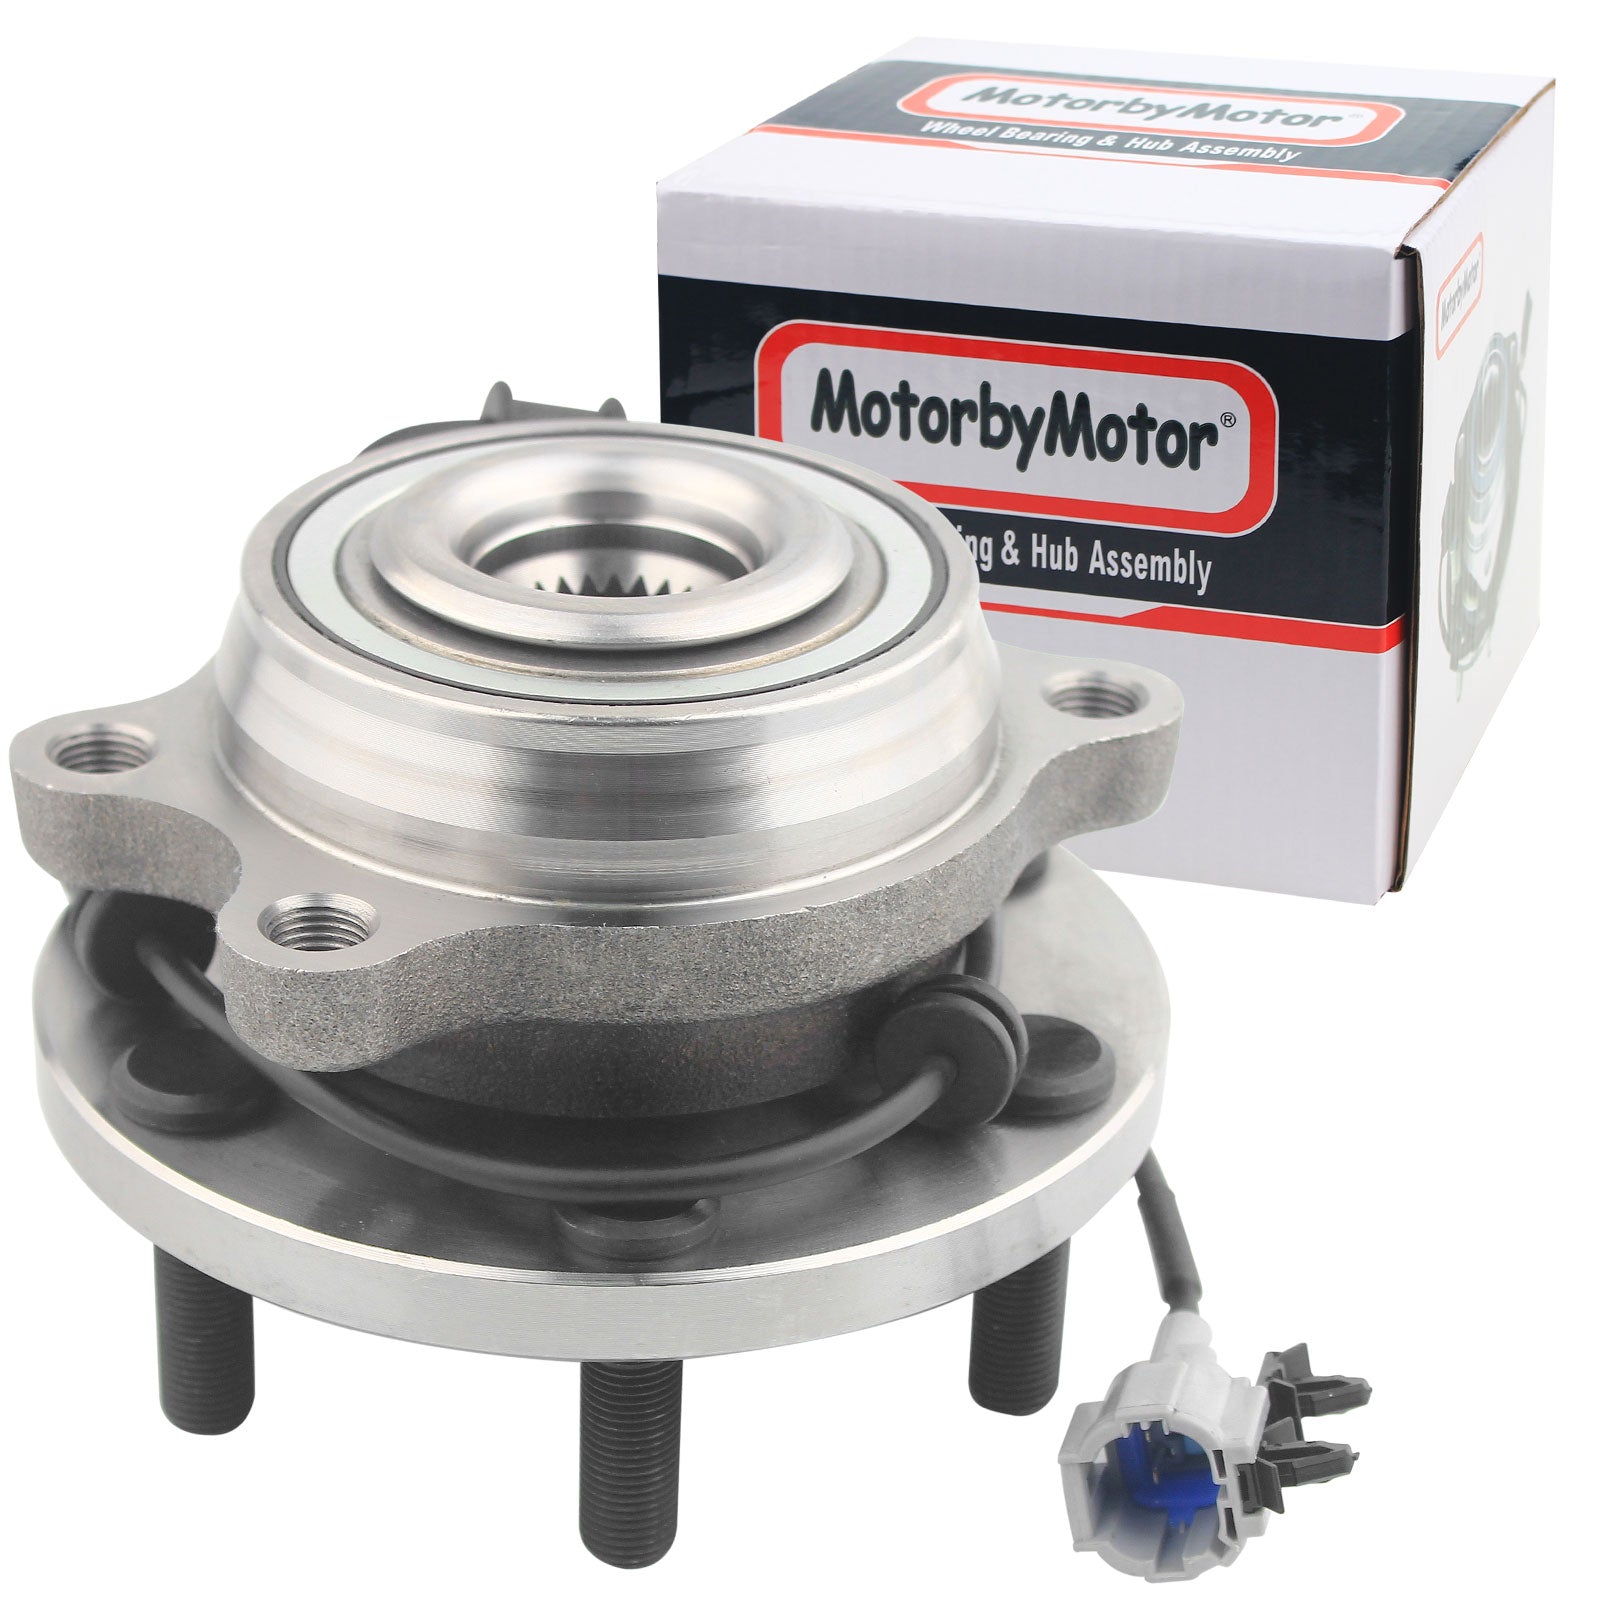 MotorbyMotor 515065 Front Wheel Bearing and Hub Assembly 4WD with 6 Lugs fits for Nissan Frontier Pathfinder Xterra,Suzuki Equator Low-Runout OE Directly Replacement Hub Bearing w/ABS MotorbyMotor